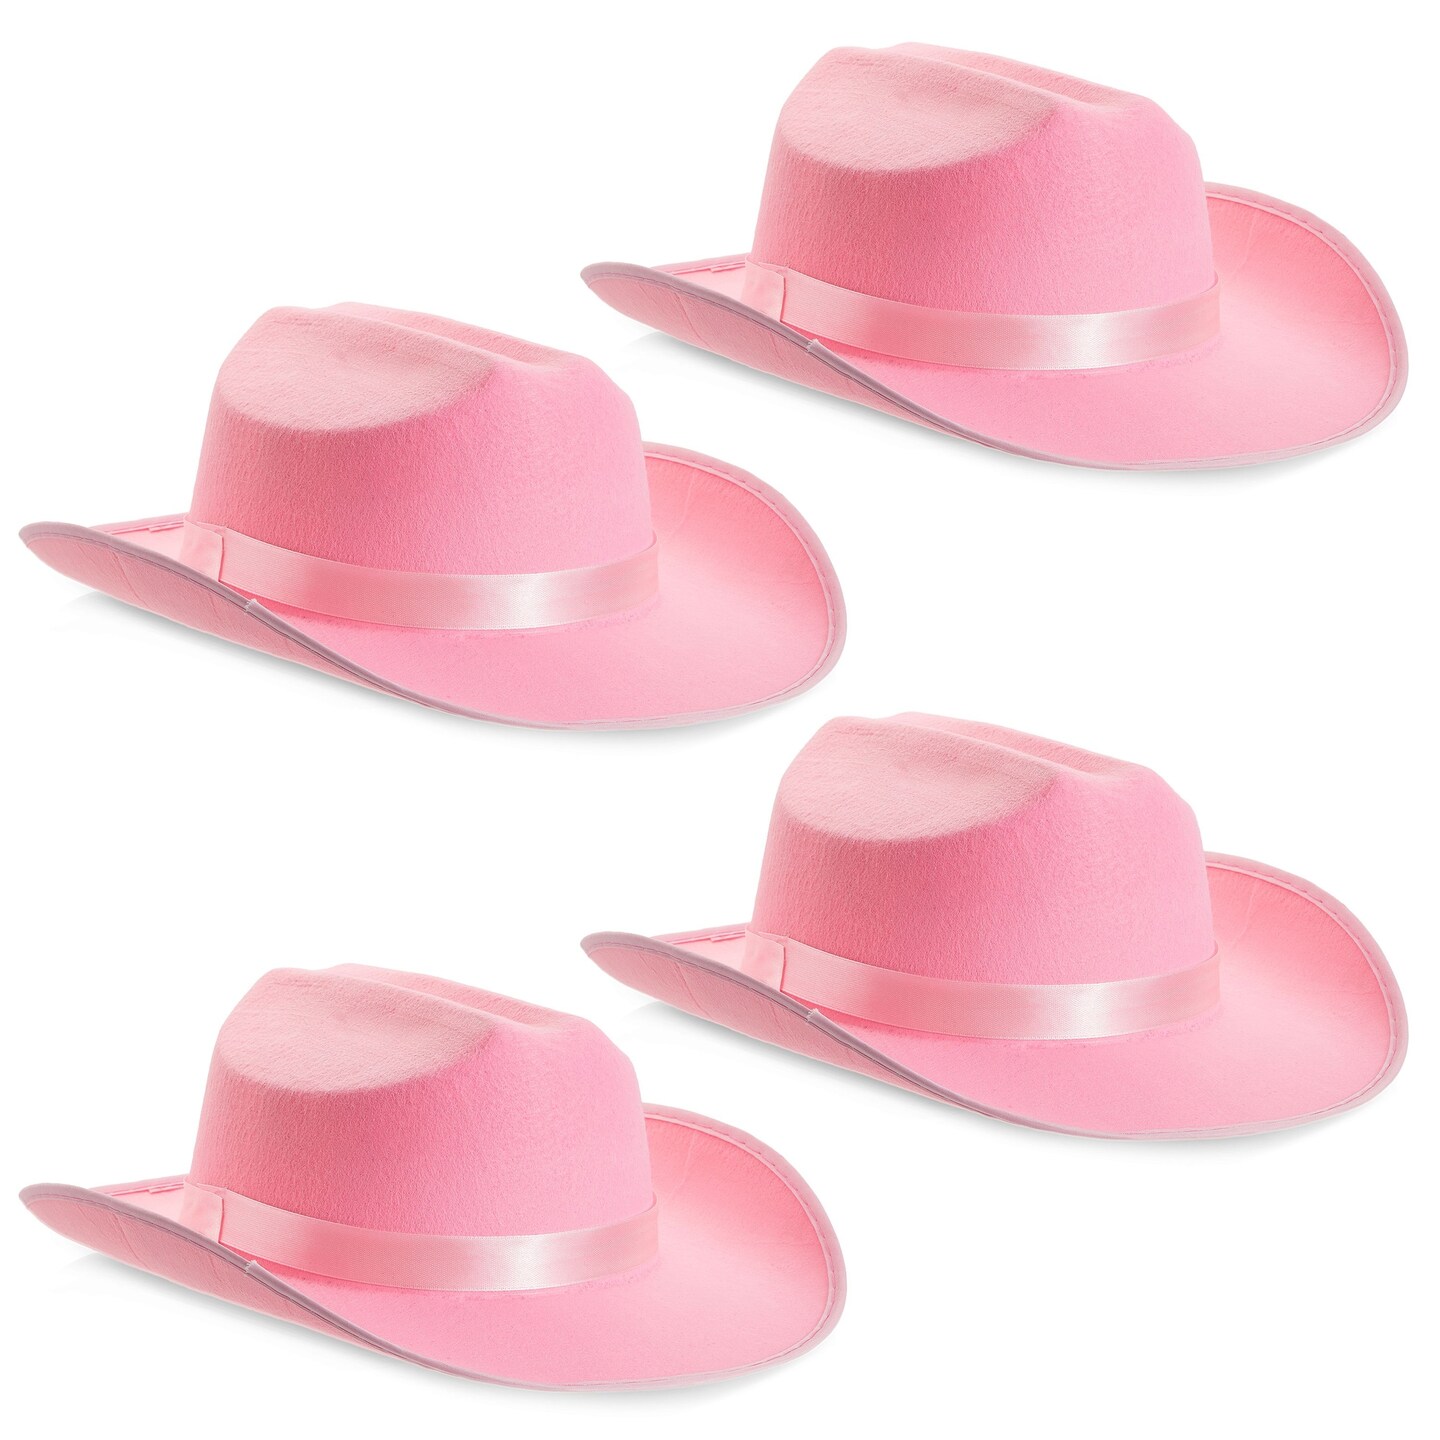 4-Pack Pink Cowboy Hats for Girls - Cute Felt Cowgirl Hats for Costume, Dress Up Party (One Size Fits All)